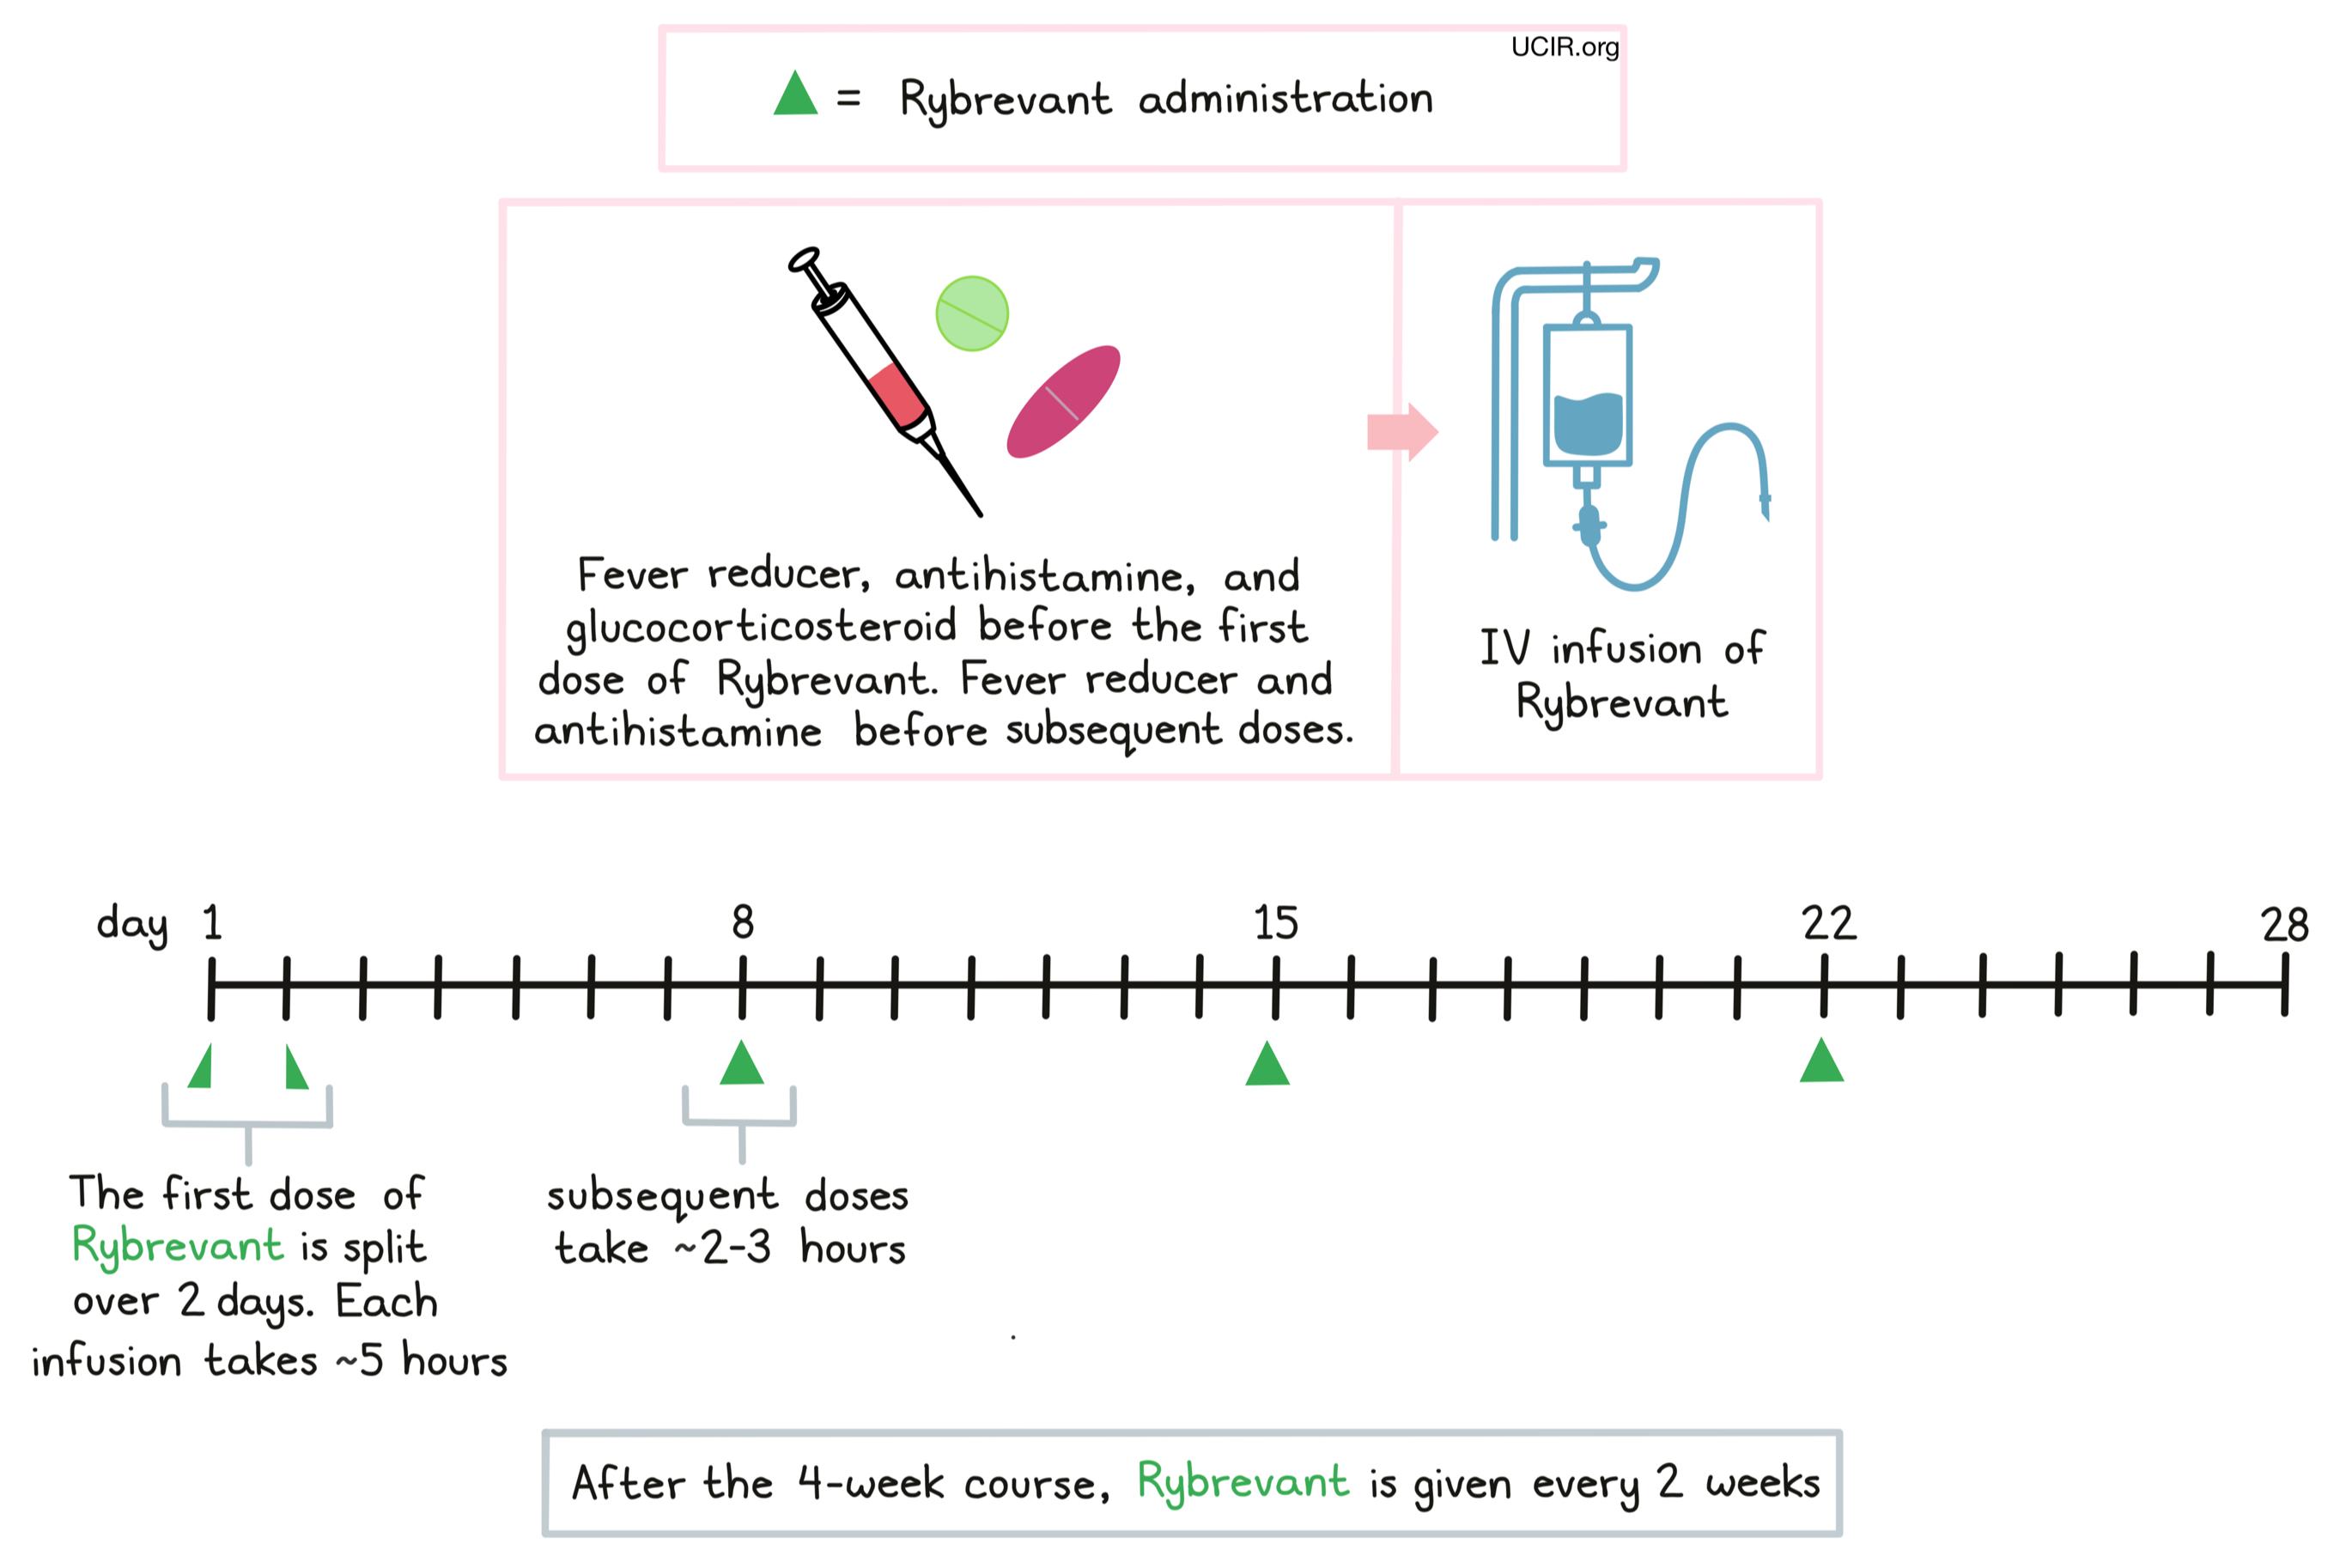 Illustration showing how Rybrevant is administered to patients